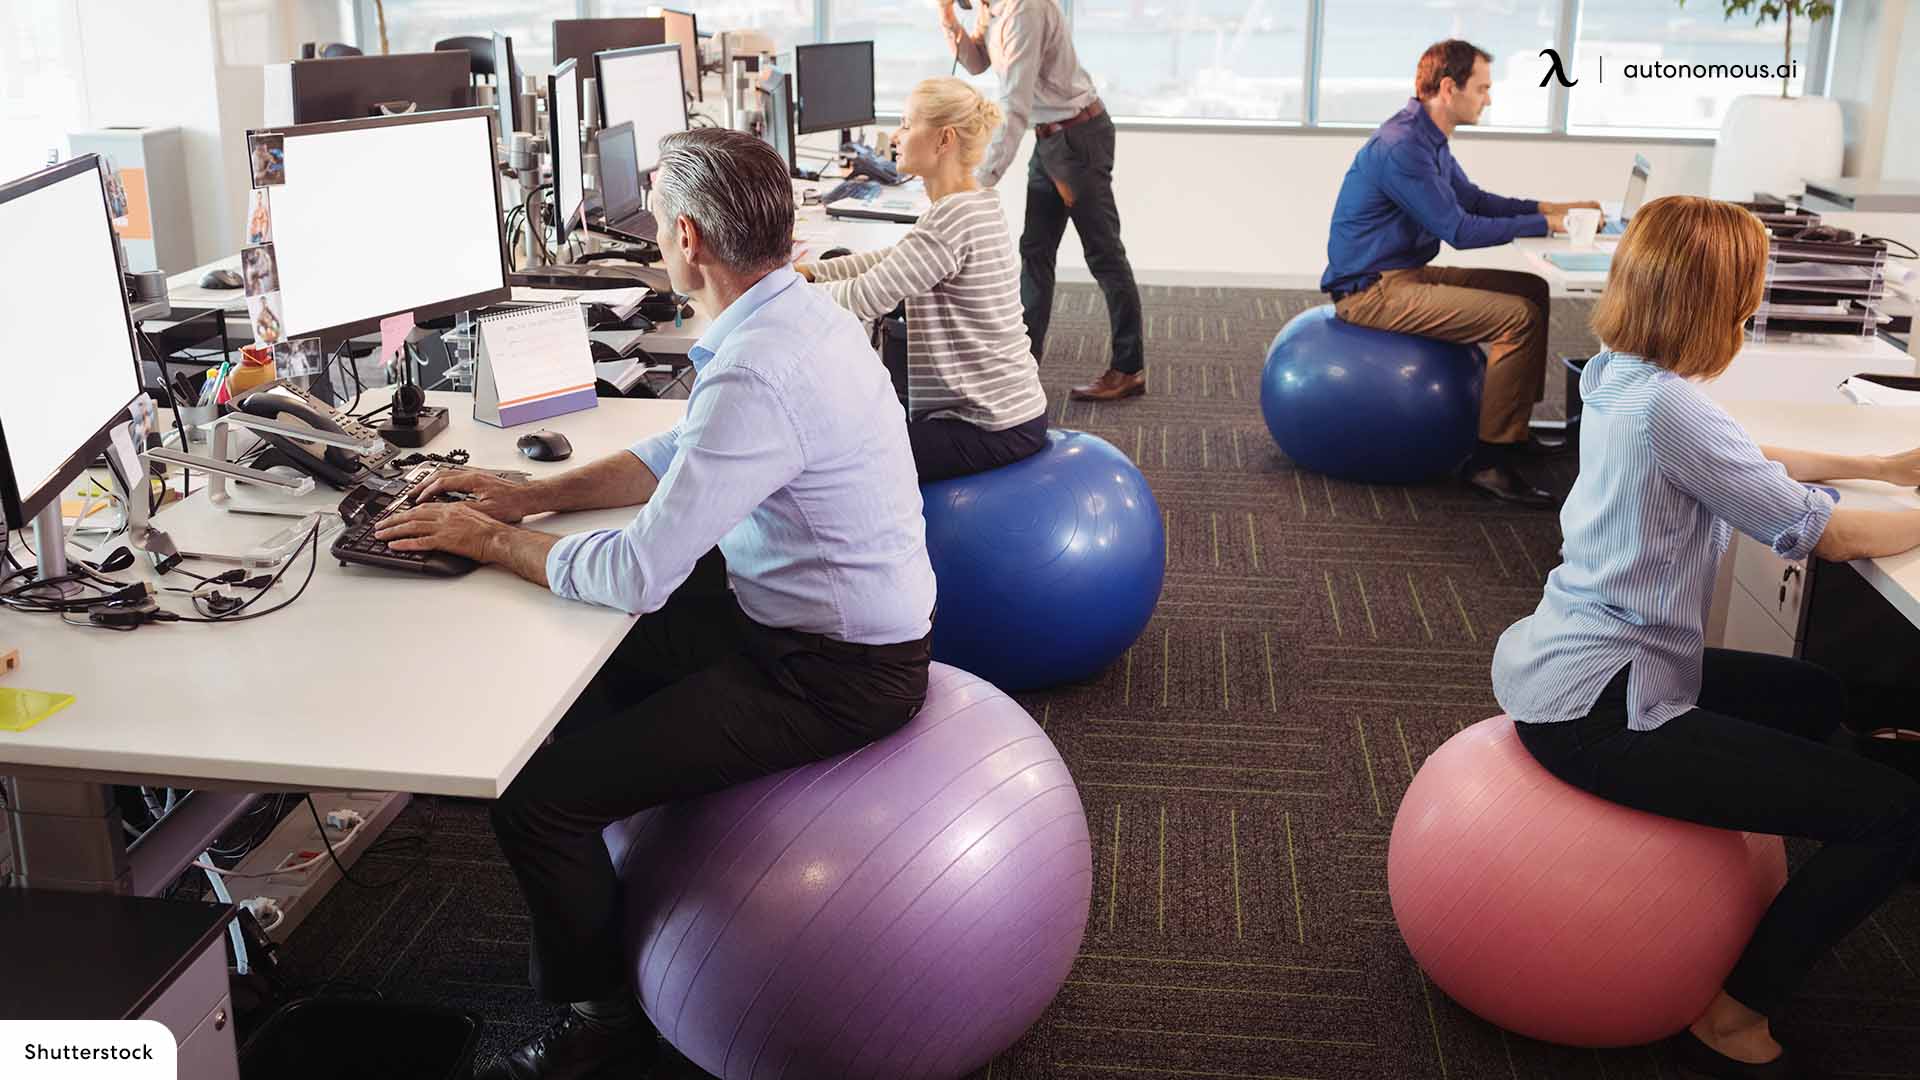 Can You Alternate Your Office Chair With an Exercise Ball?